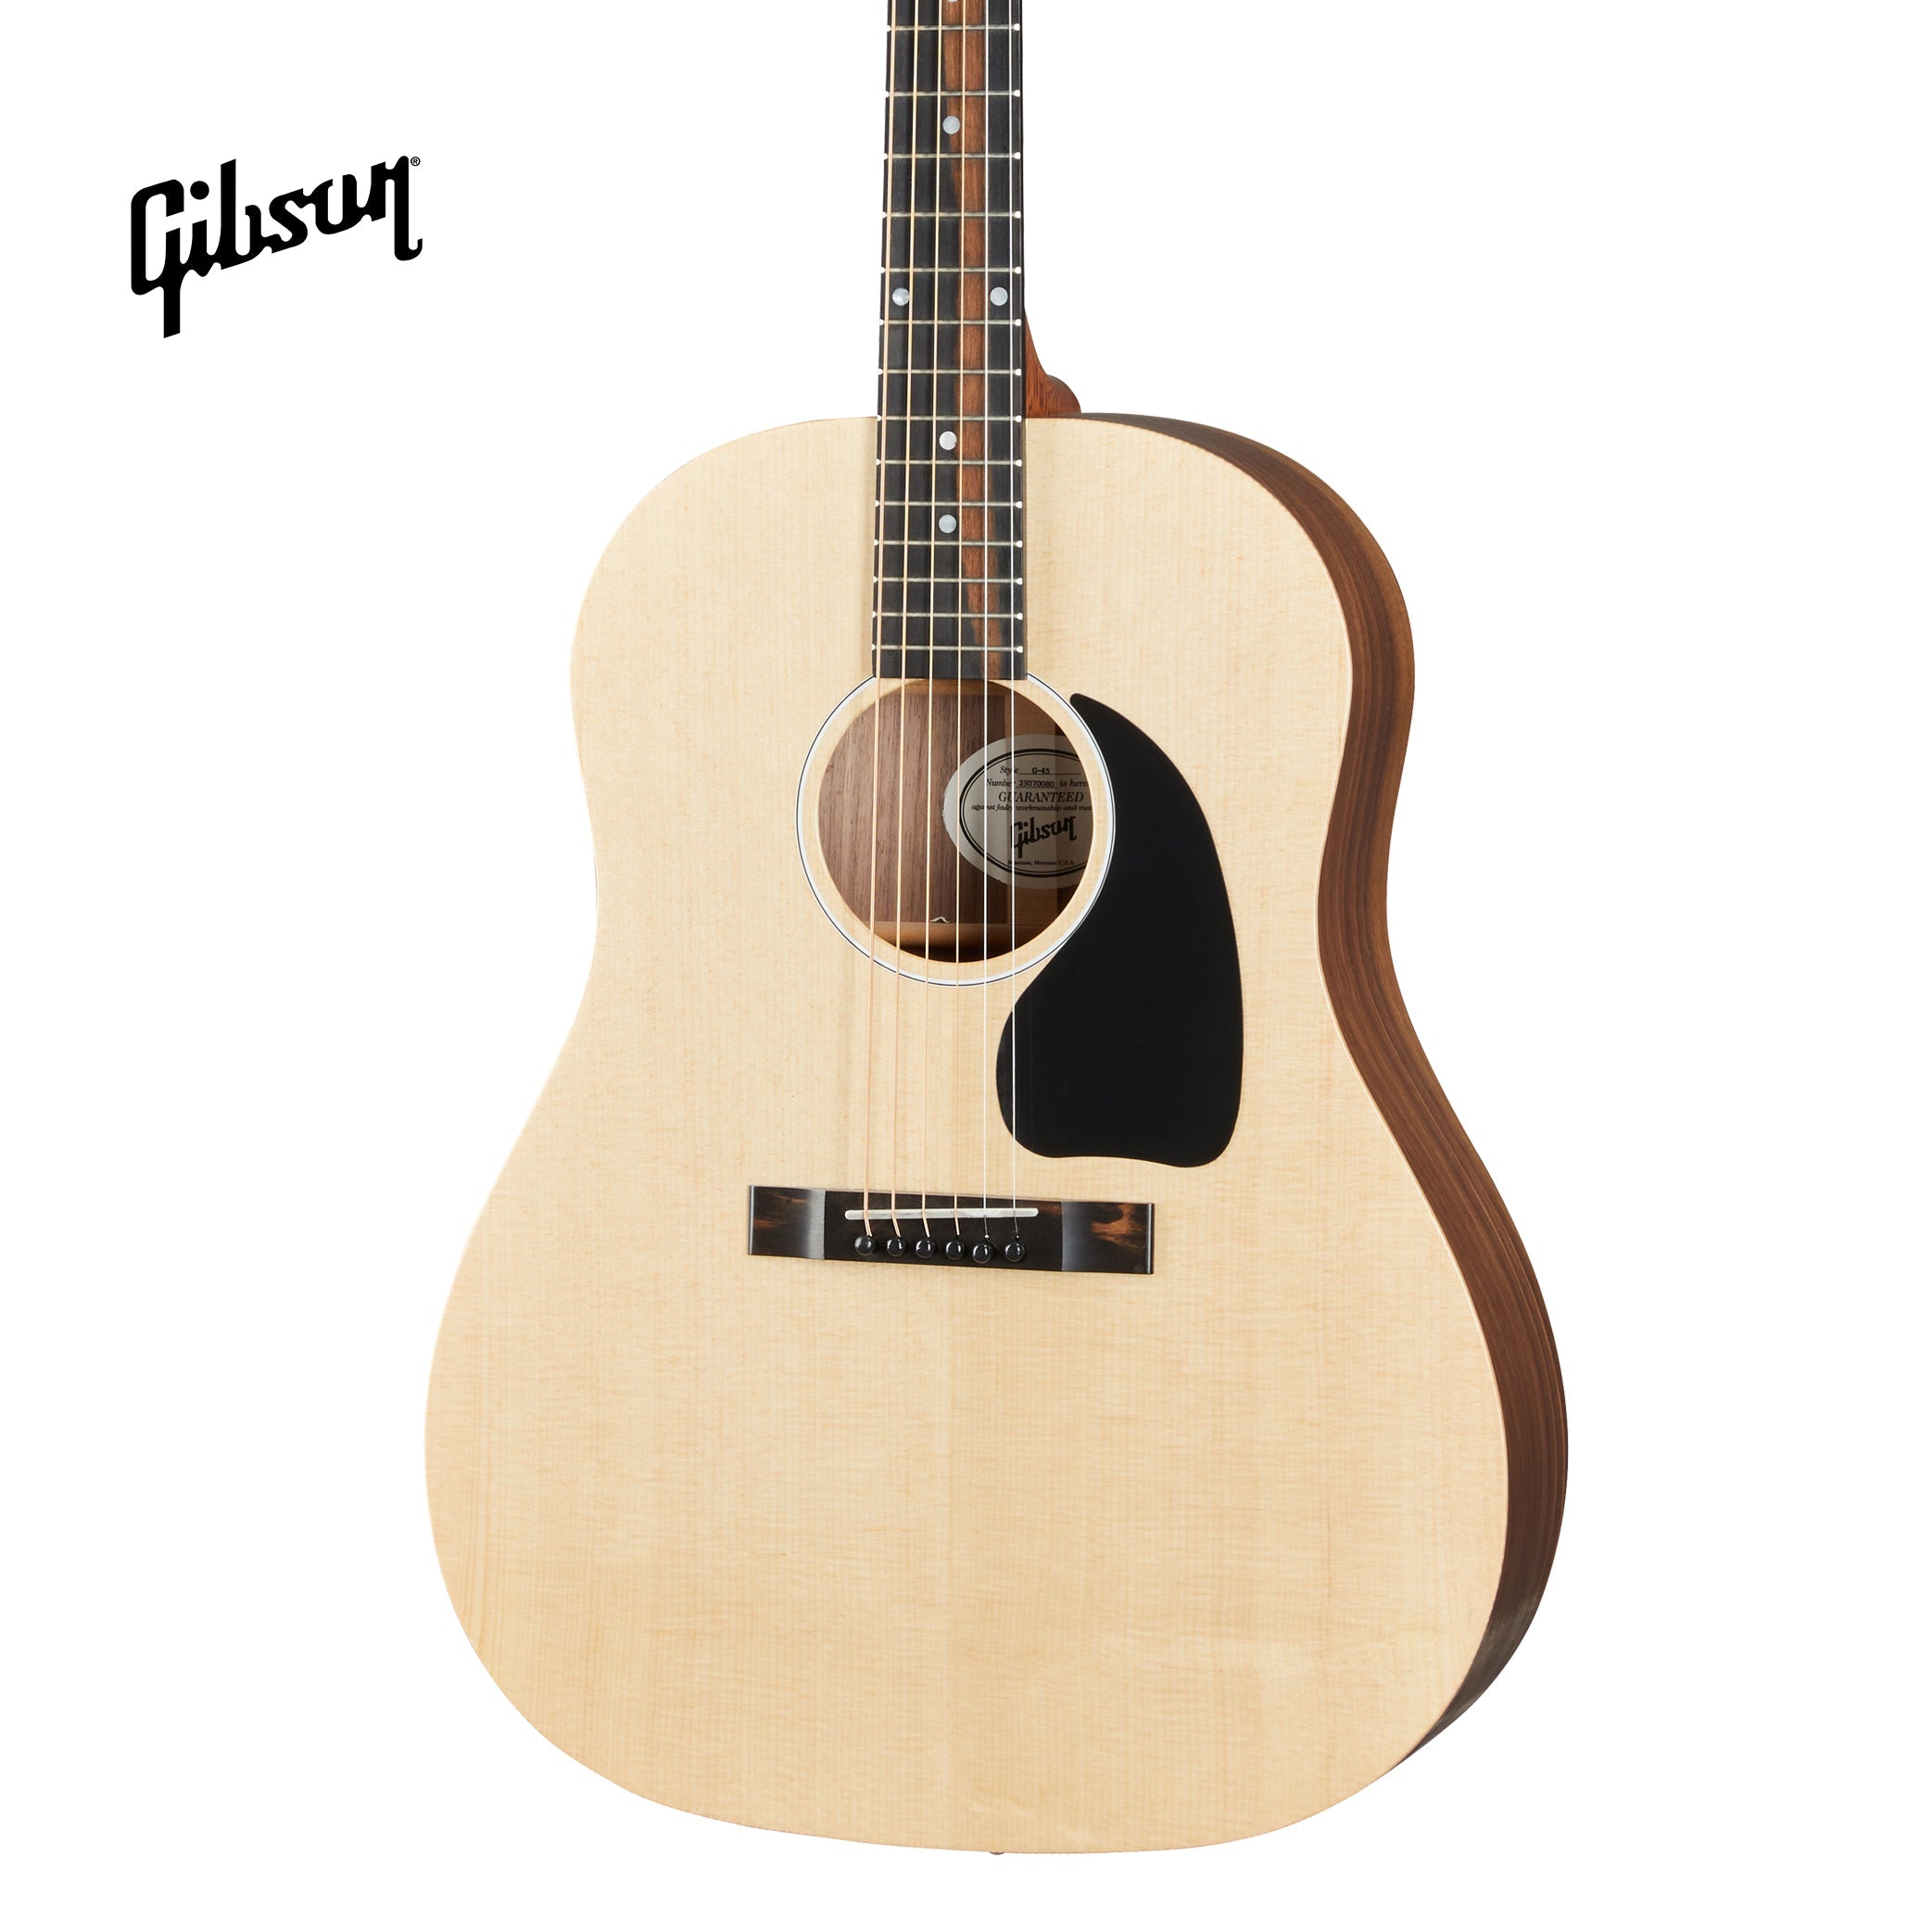 GIBSON G-45 ACOUSTIC GUITAR - NATURAL